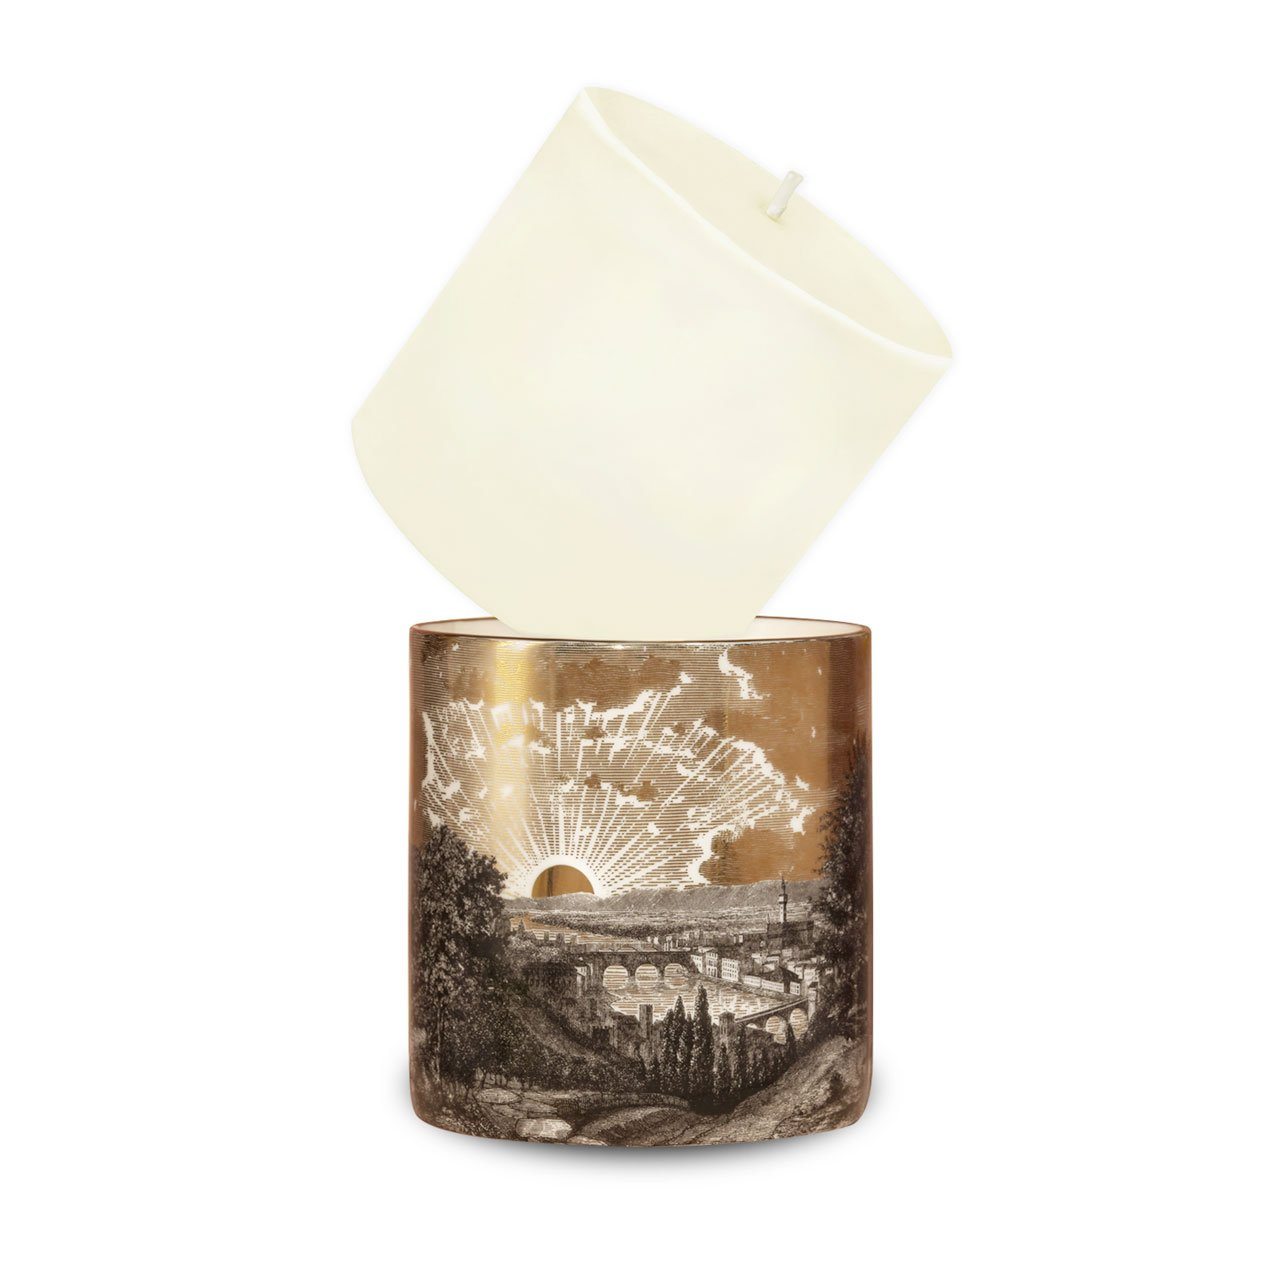 Refill for The Tuscan Sunset Ceramic Candle